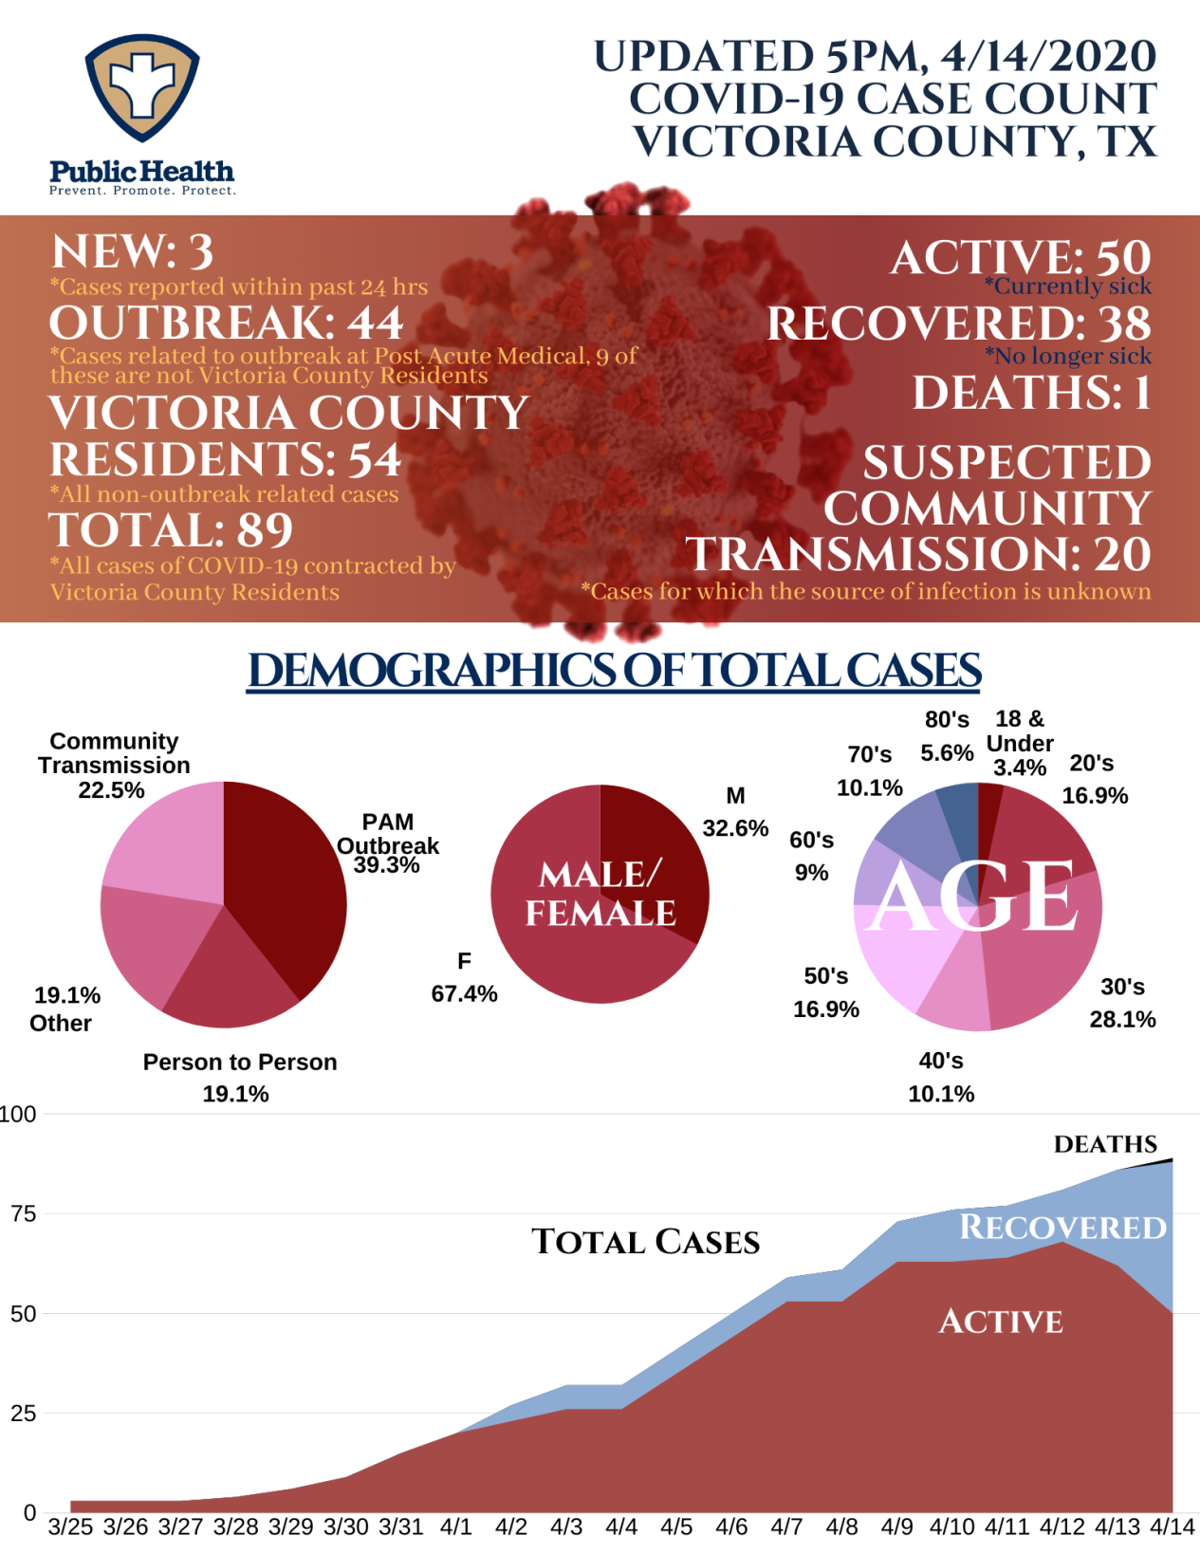 victoria county infection rate near top